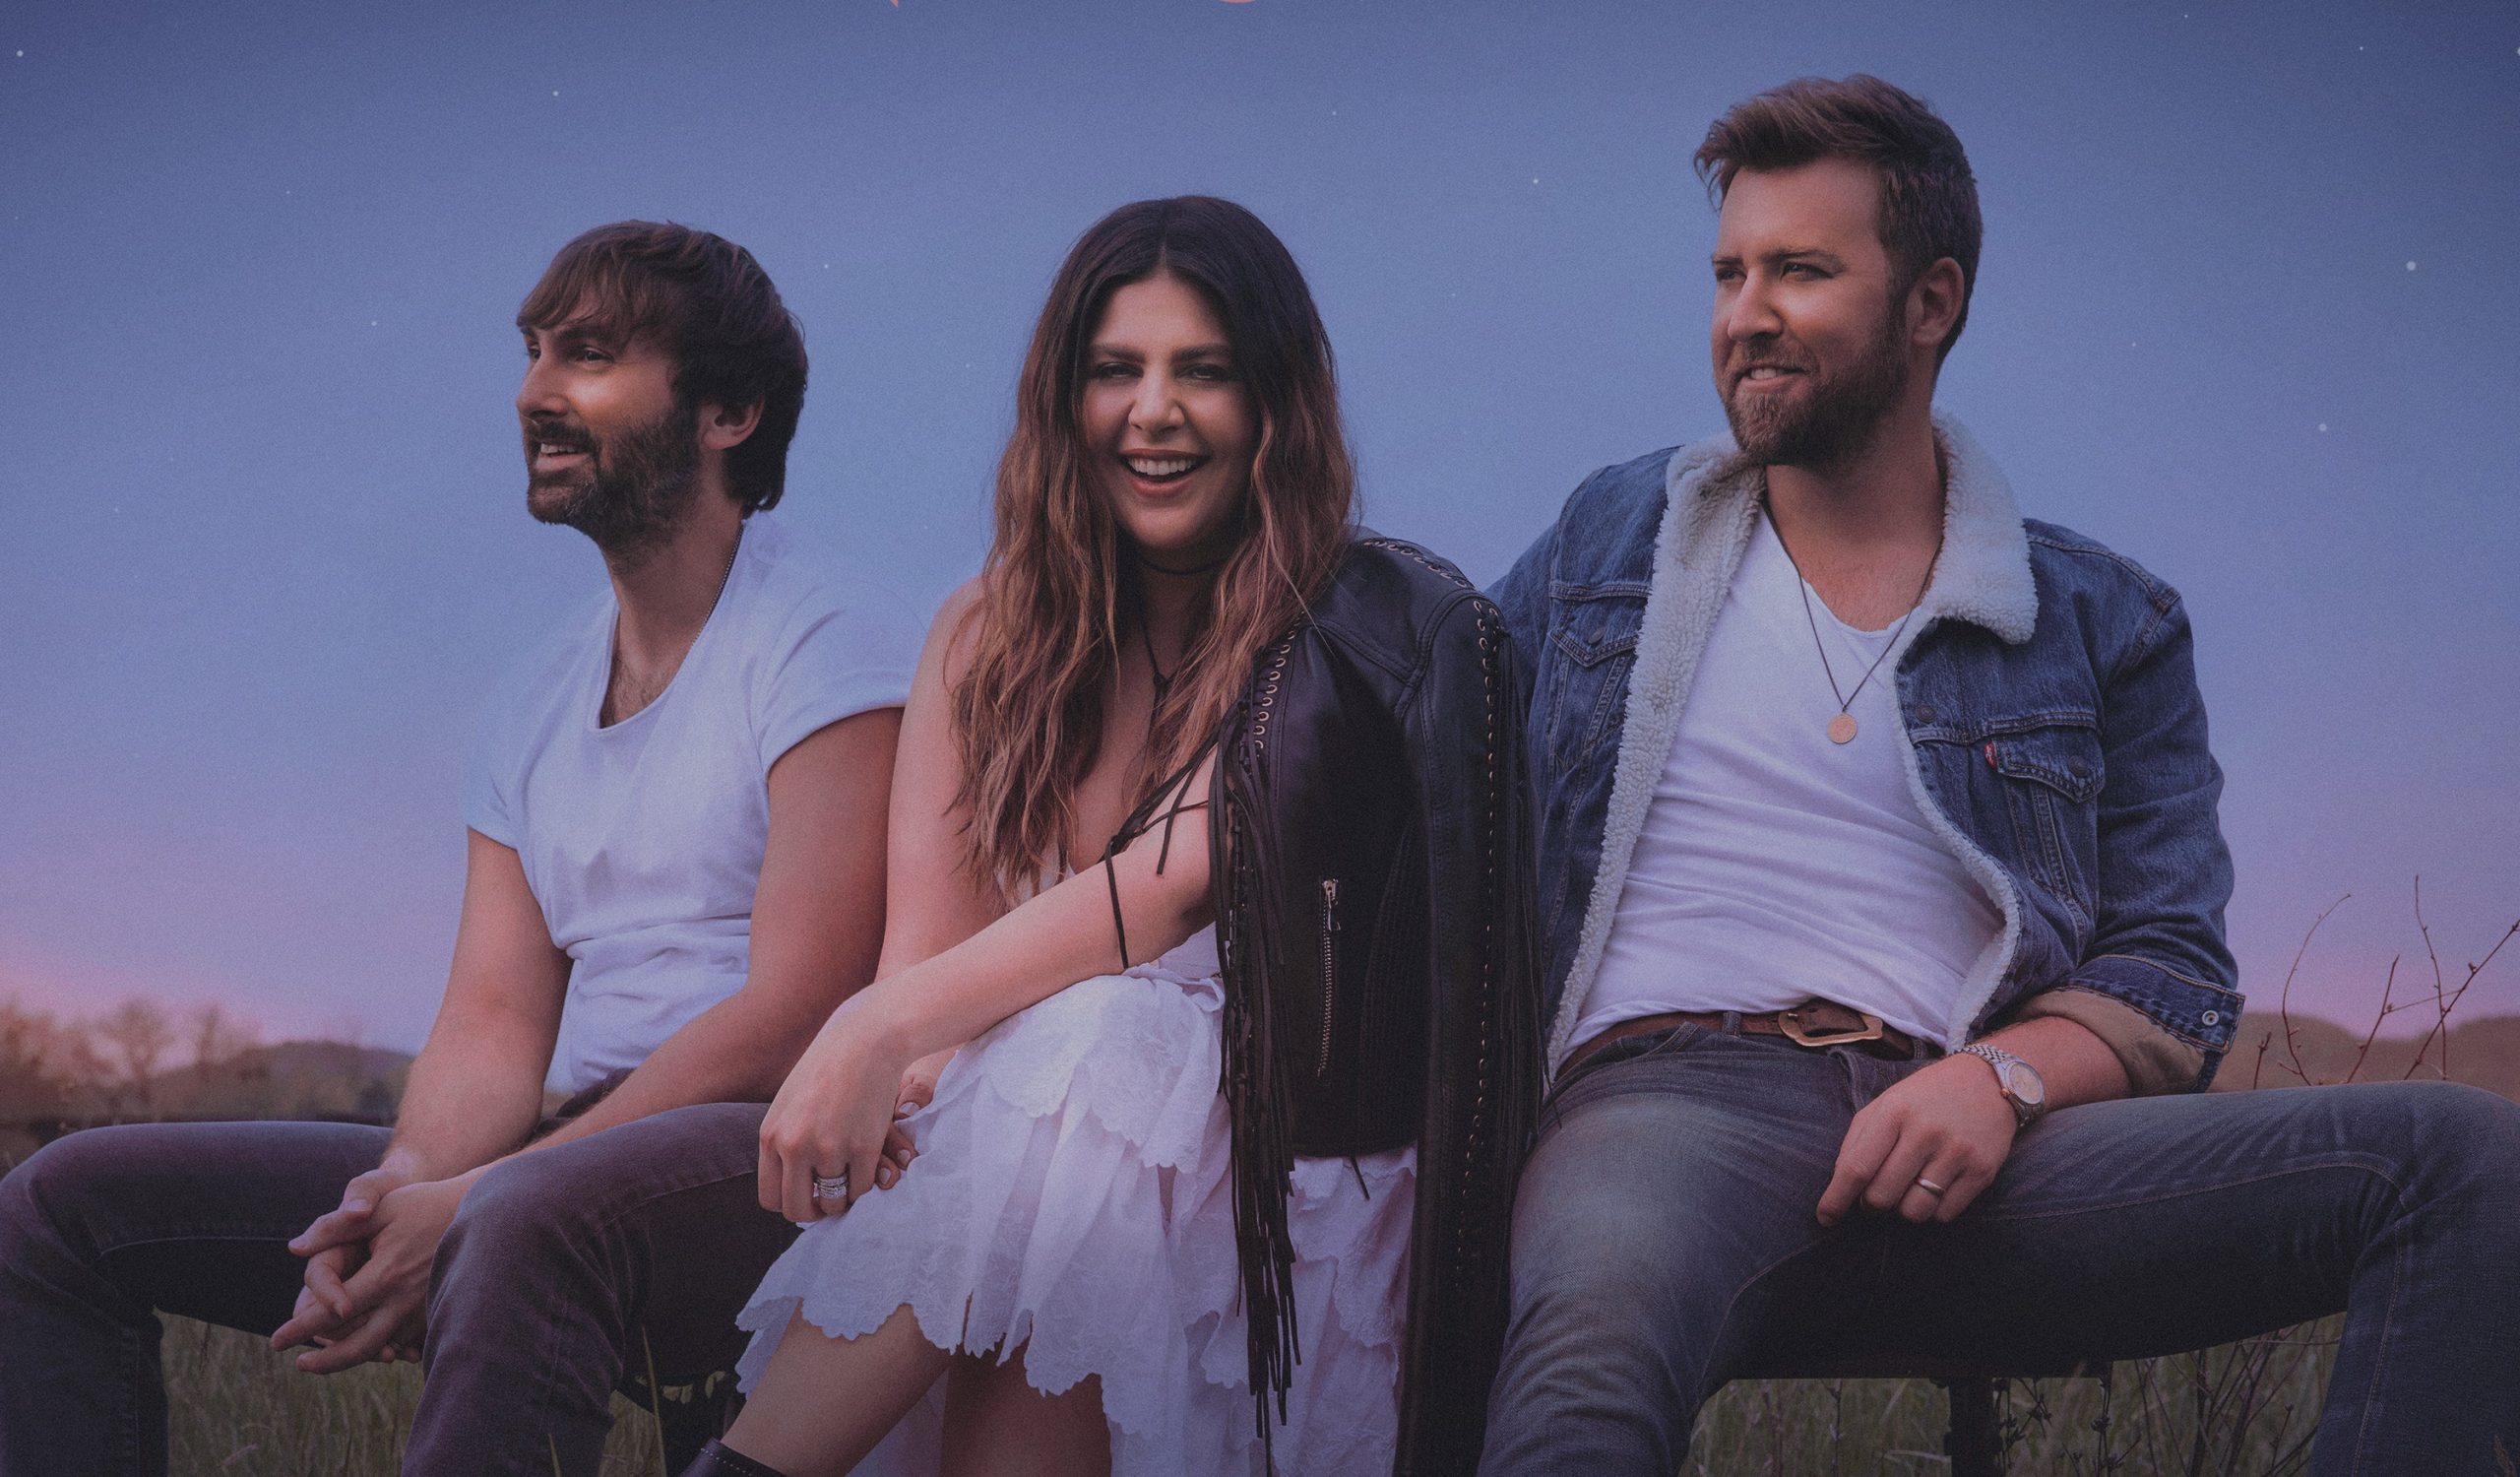 Lady Antebellum Pop Open 'Champagne Night' as New Single Sounds Like ...